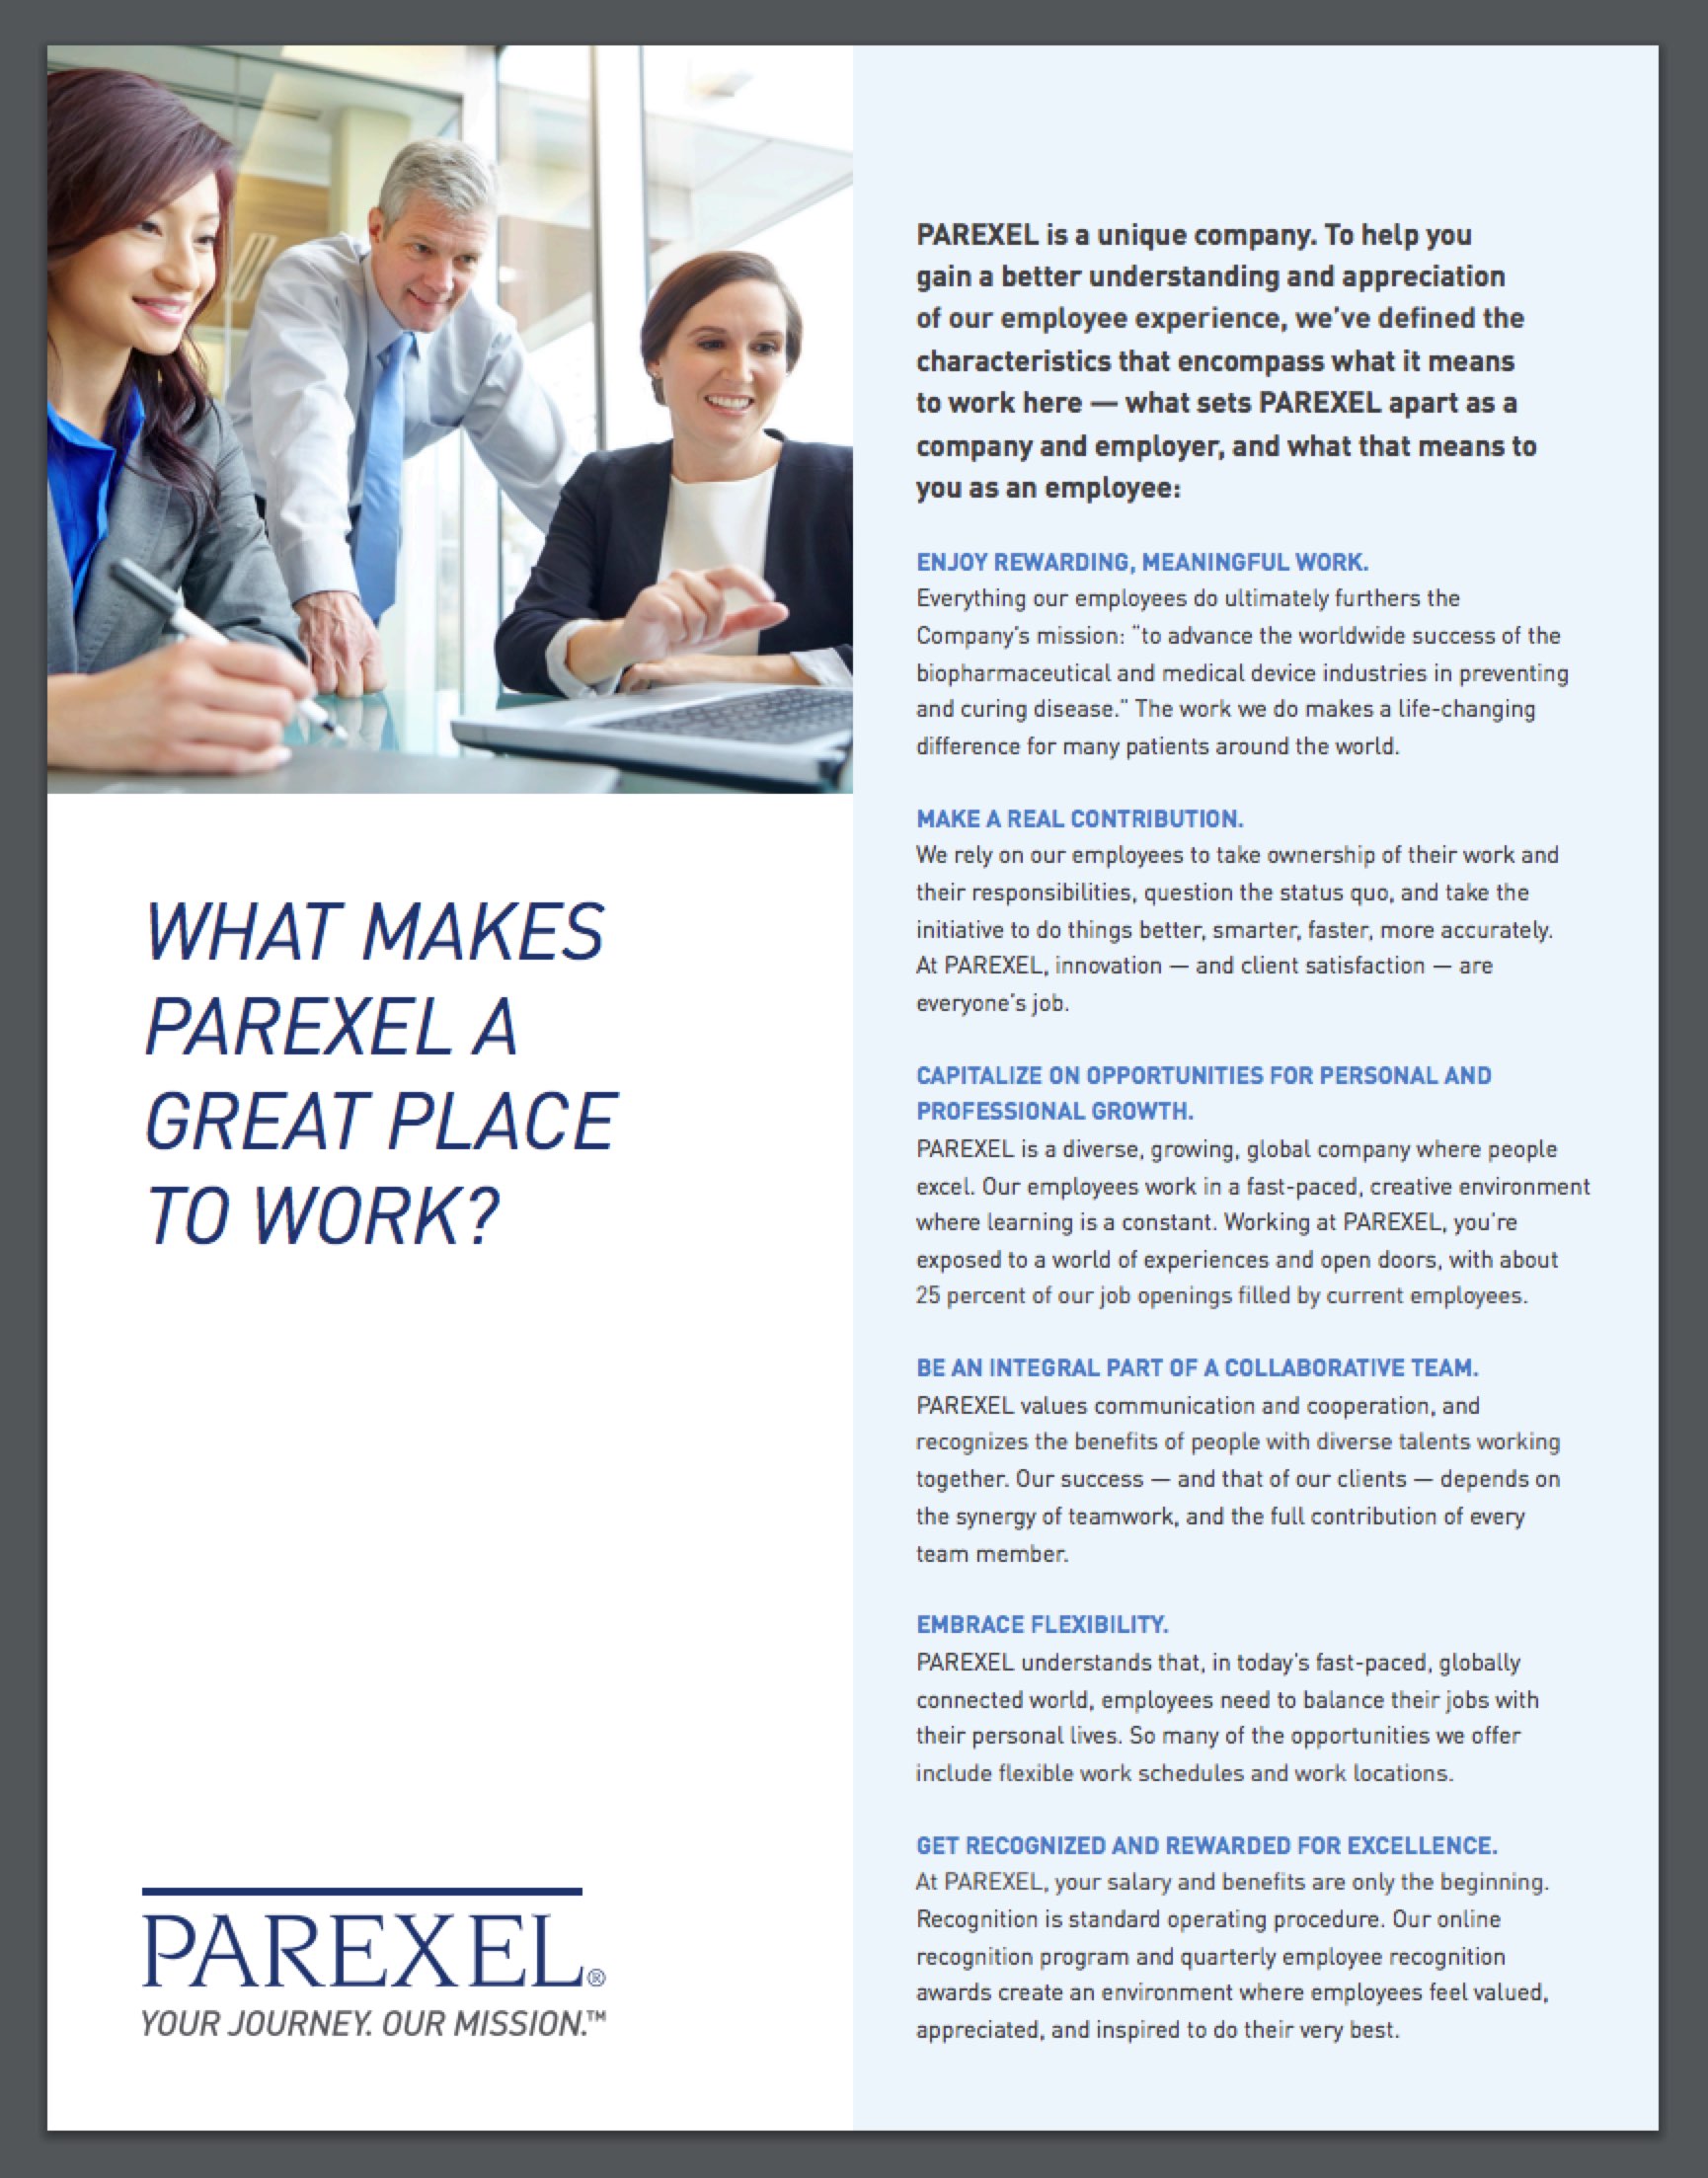 employee-value-proposition-evp-example-from-parexel-company-career-site